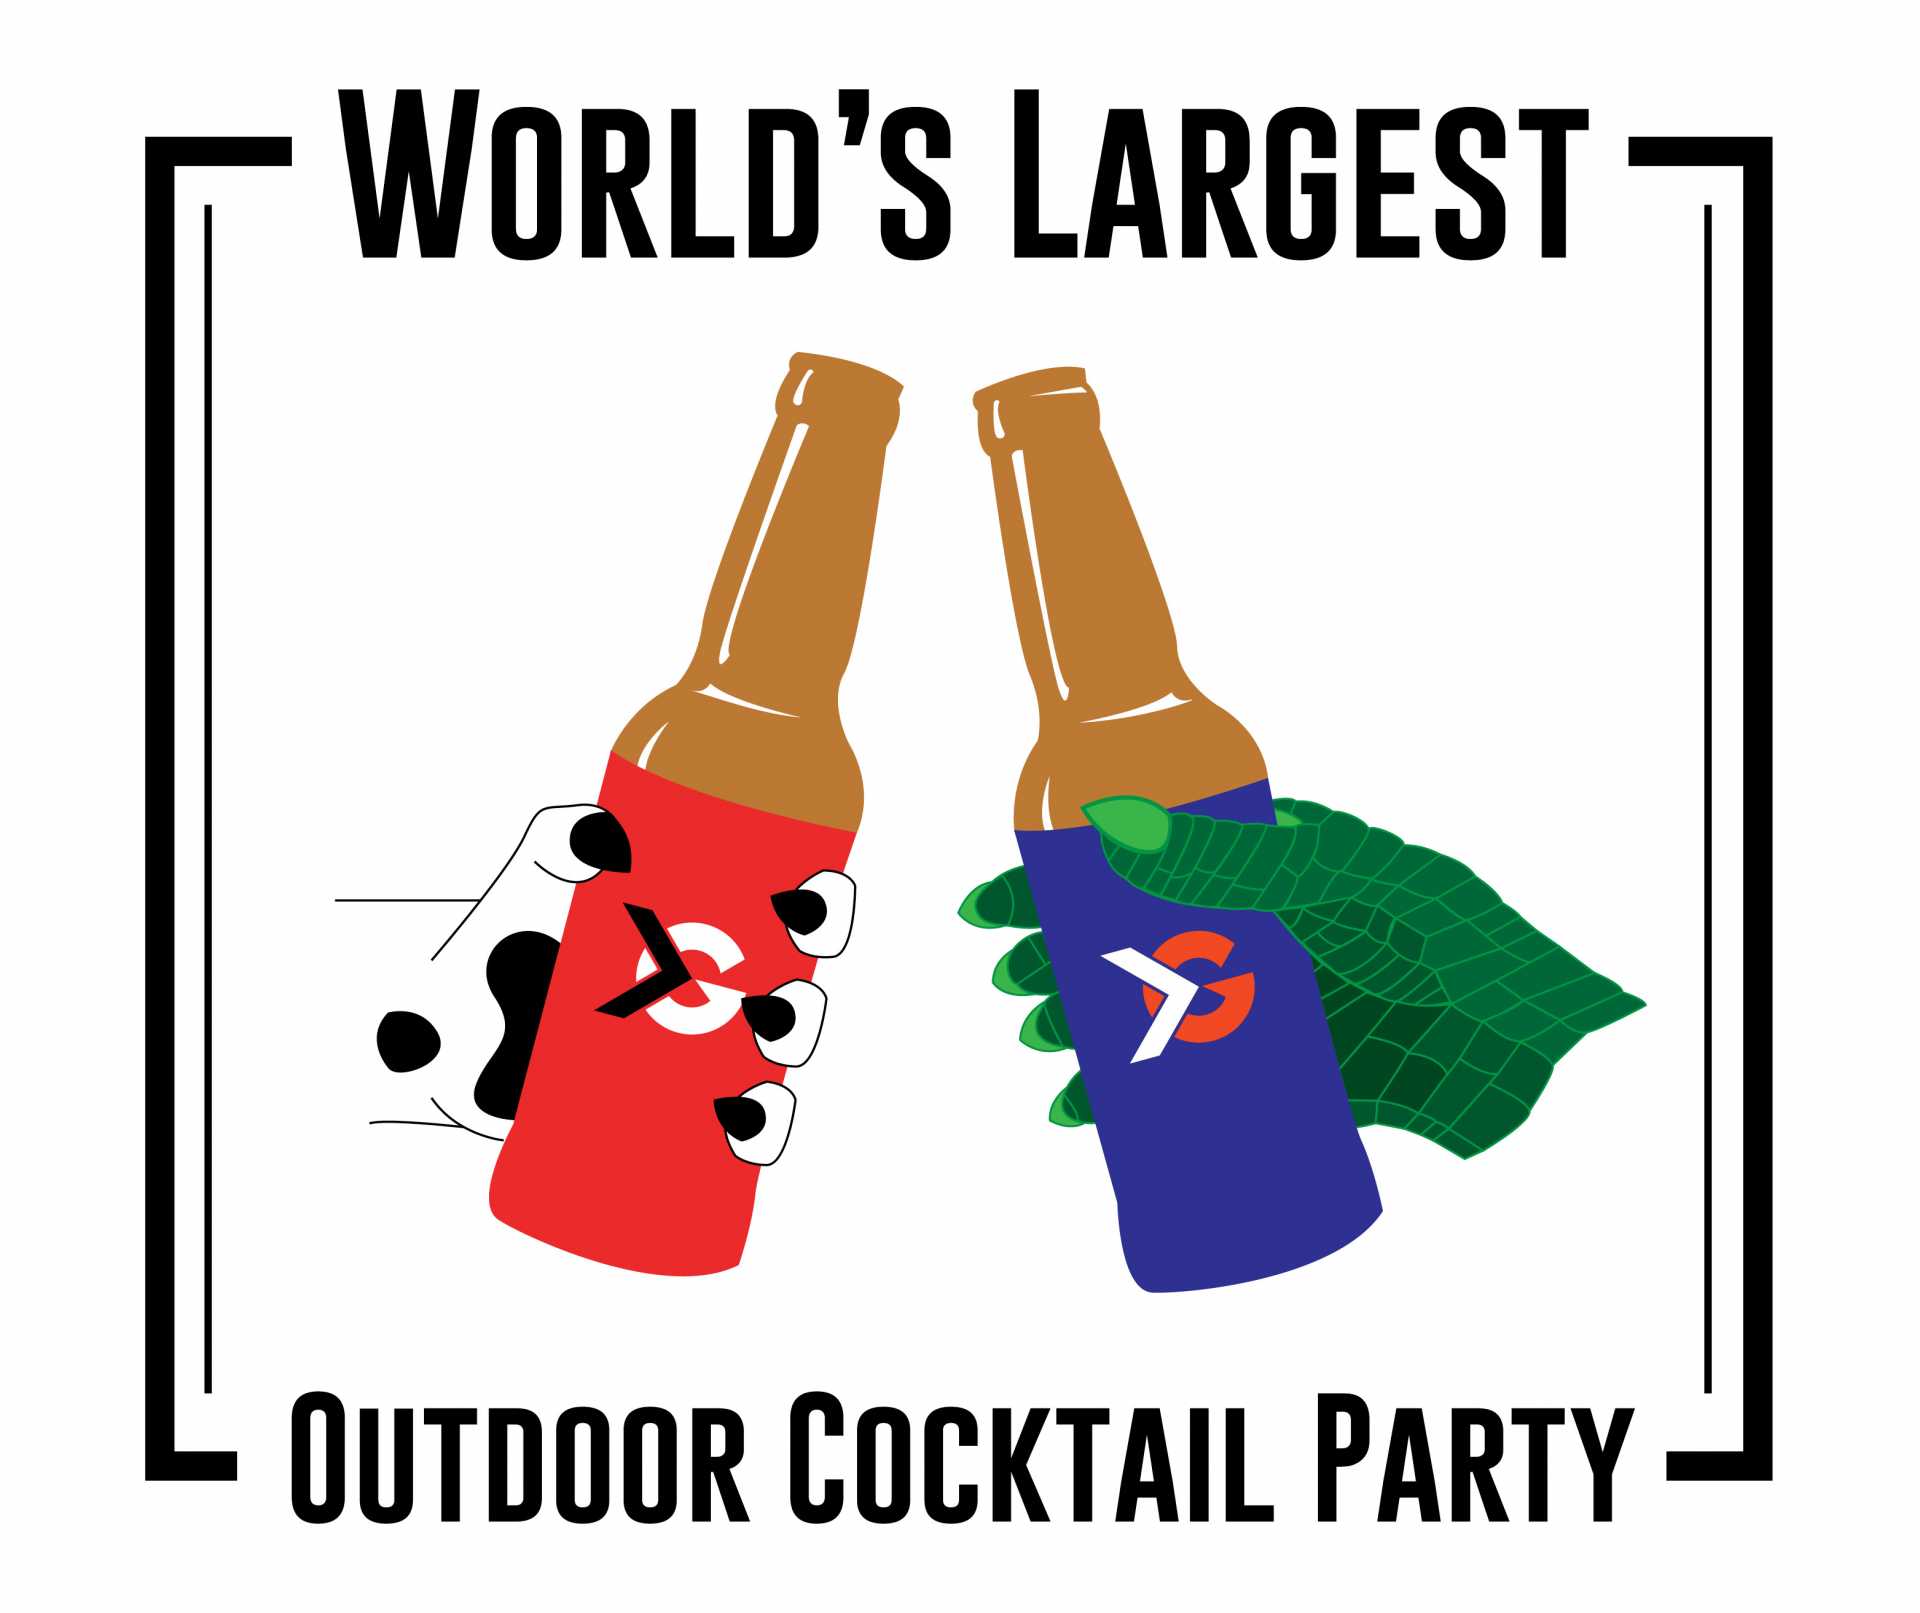 The World’s Largest Outdoor Cocktail Party ITG Next